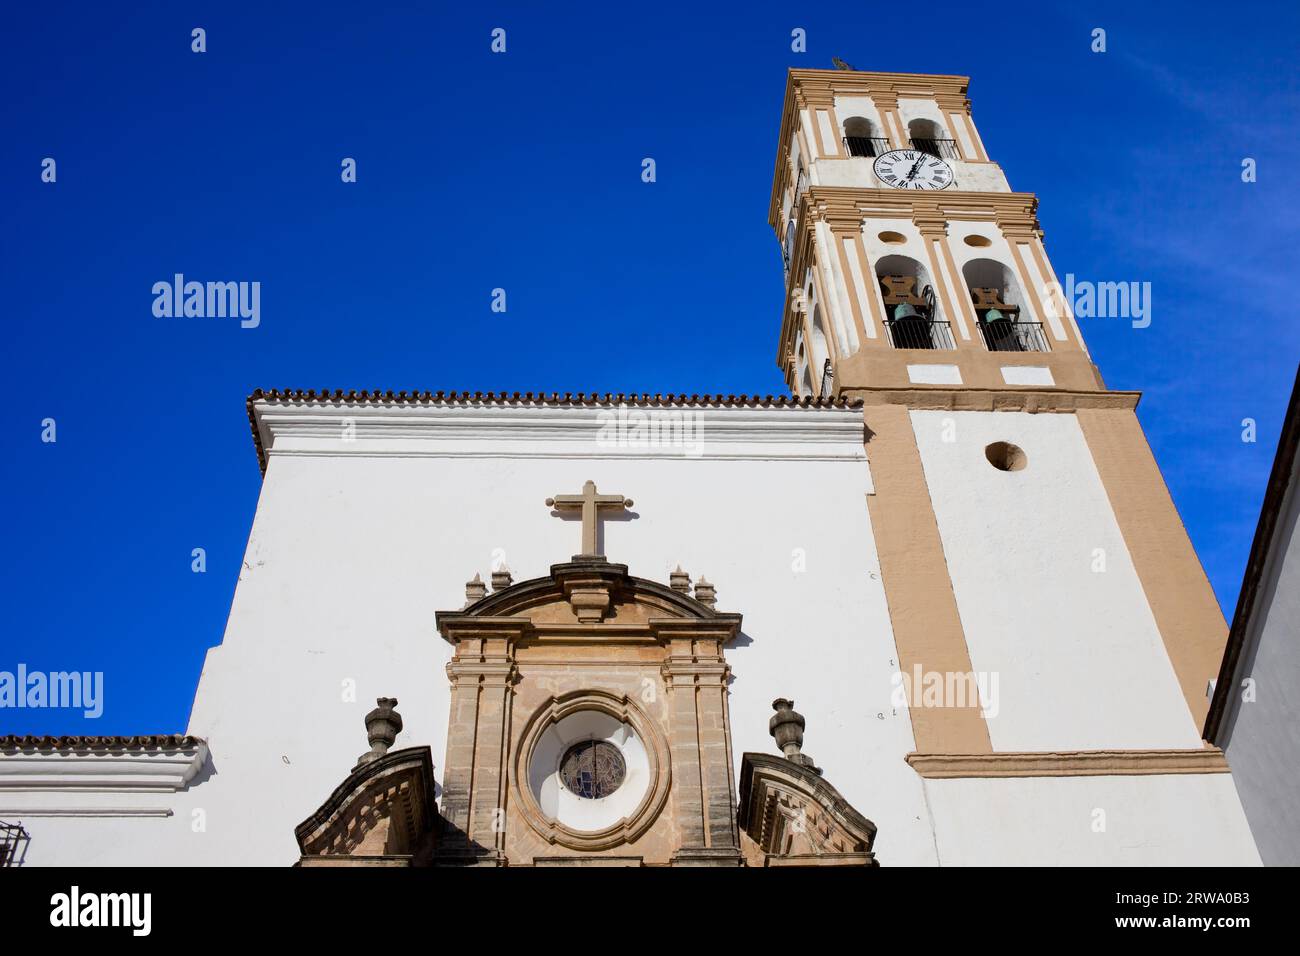 Church Of Incarnation in Marbella, Spain, Baroque style architecture Stock Photo